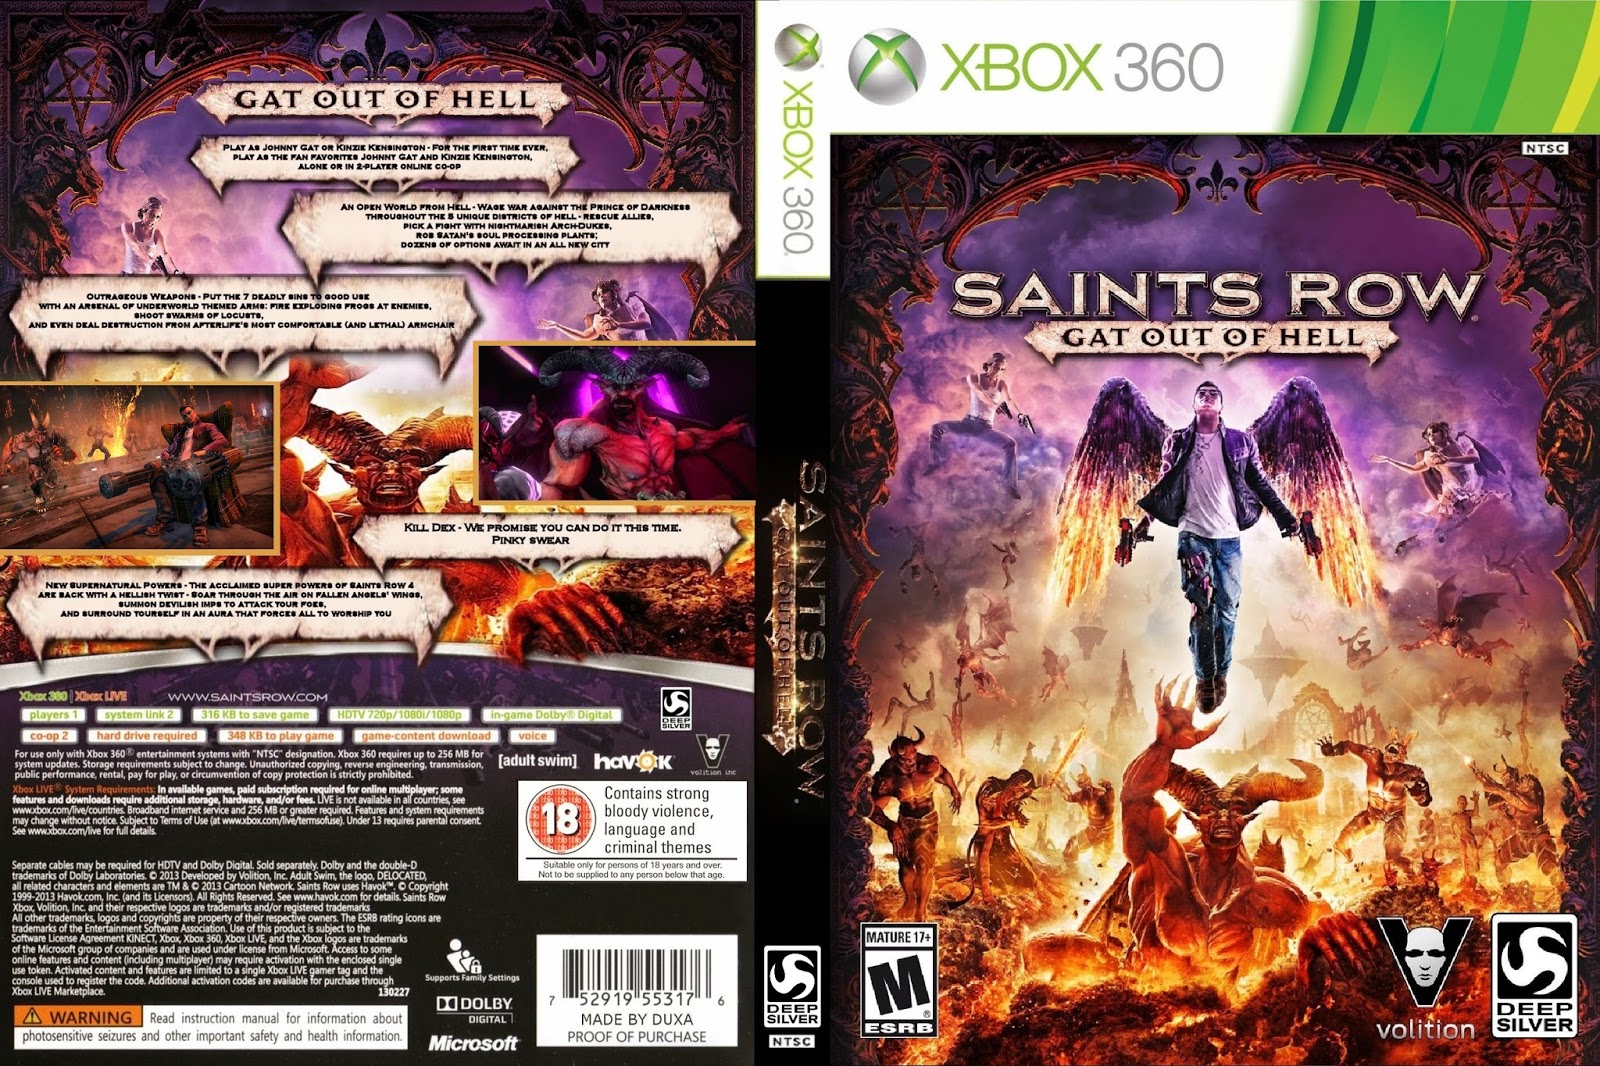 Saints row gat out of hell.